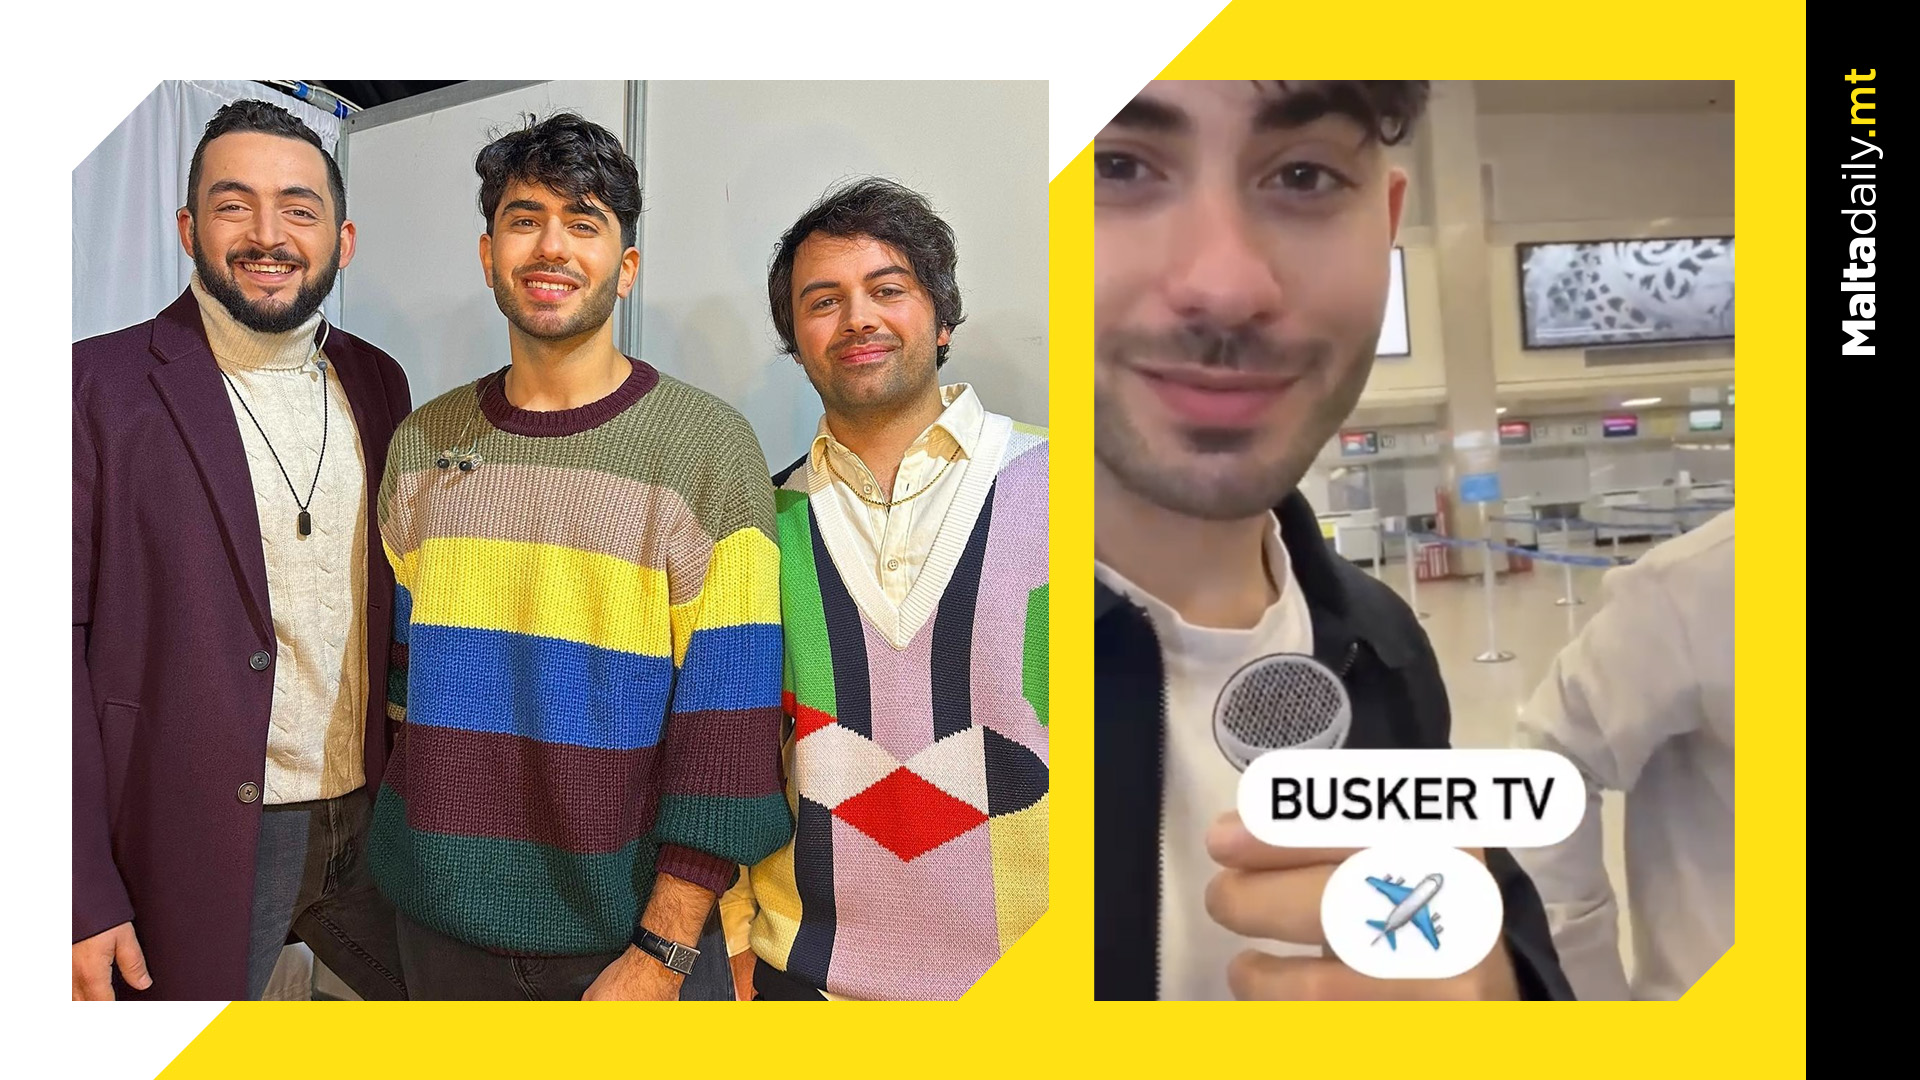 The Busker are off to Liverpool to represent Malta in the Eurovision Song Contest